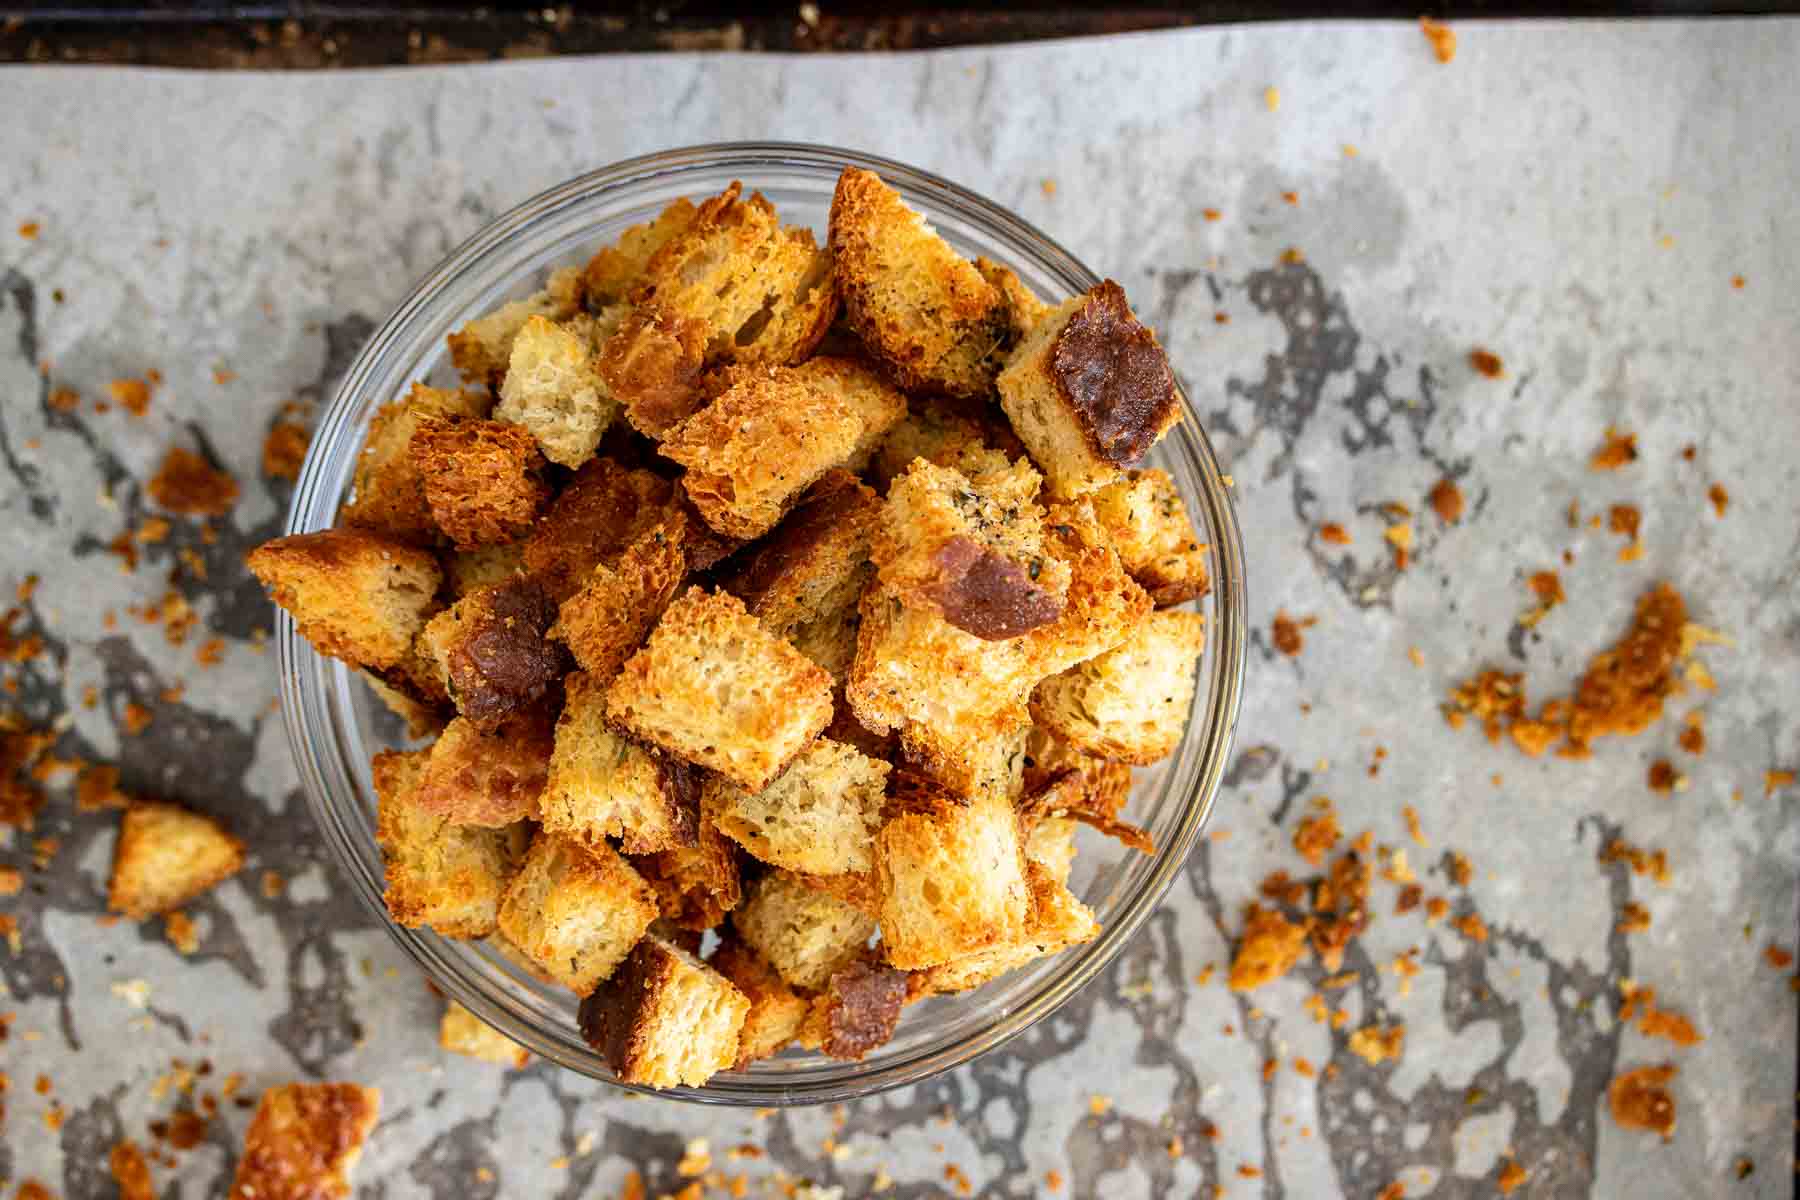 Baked croutons made with stale sourdough parmesan bread.